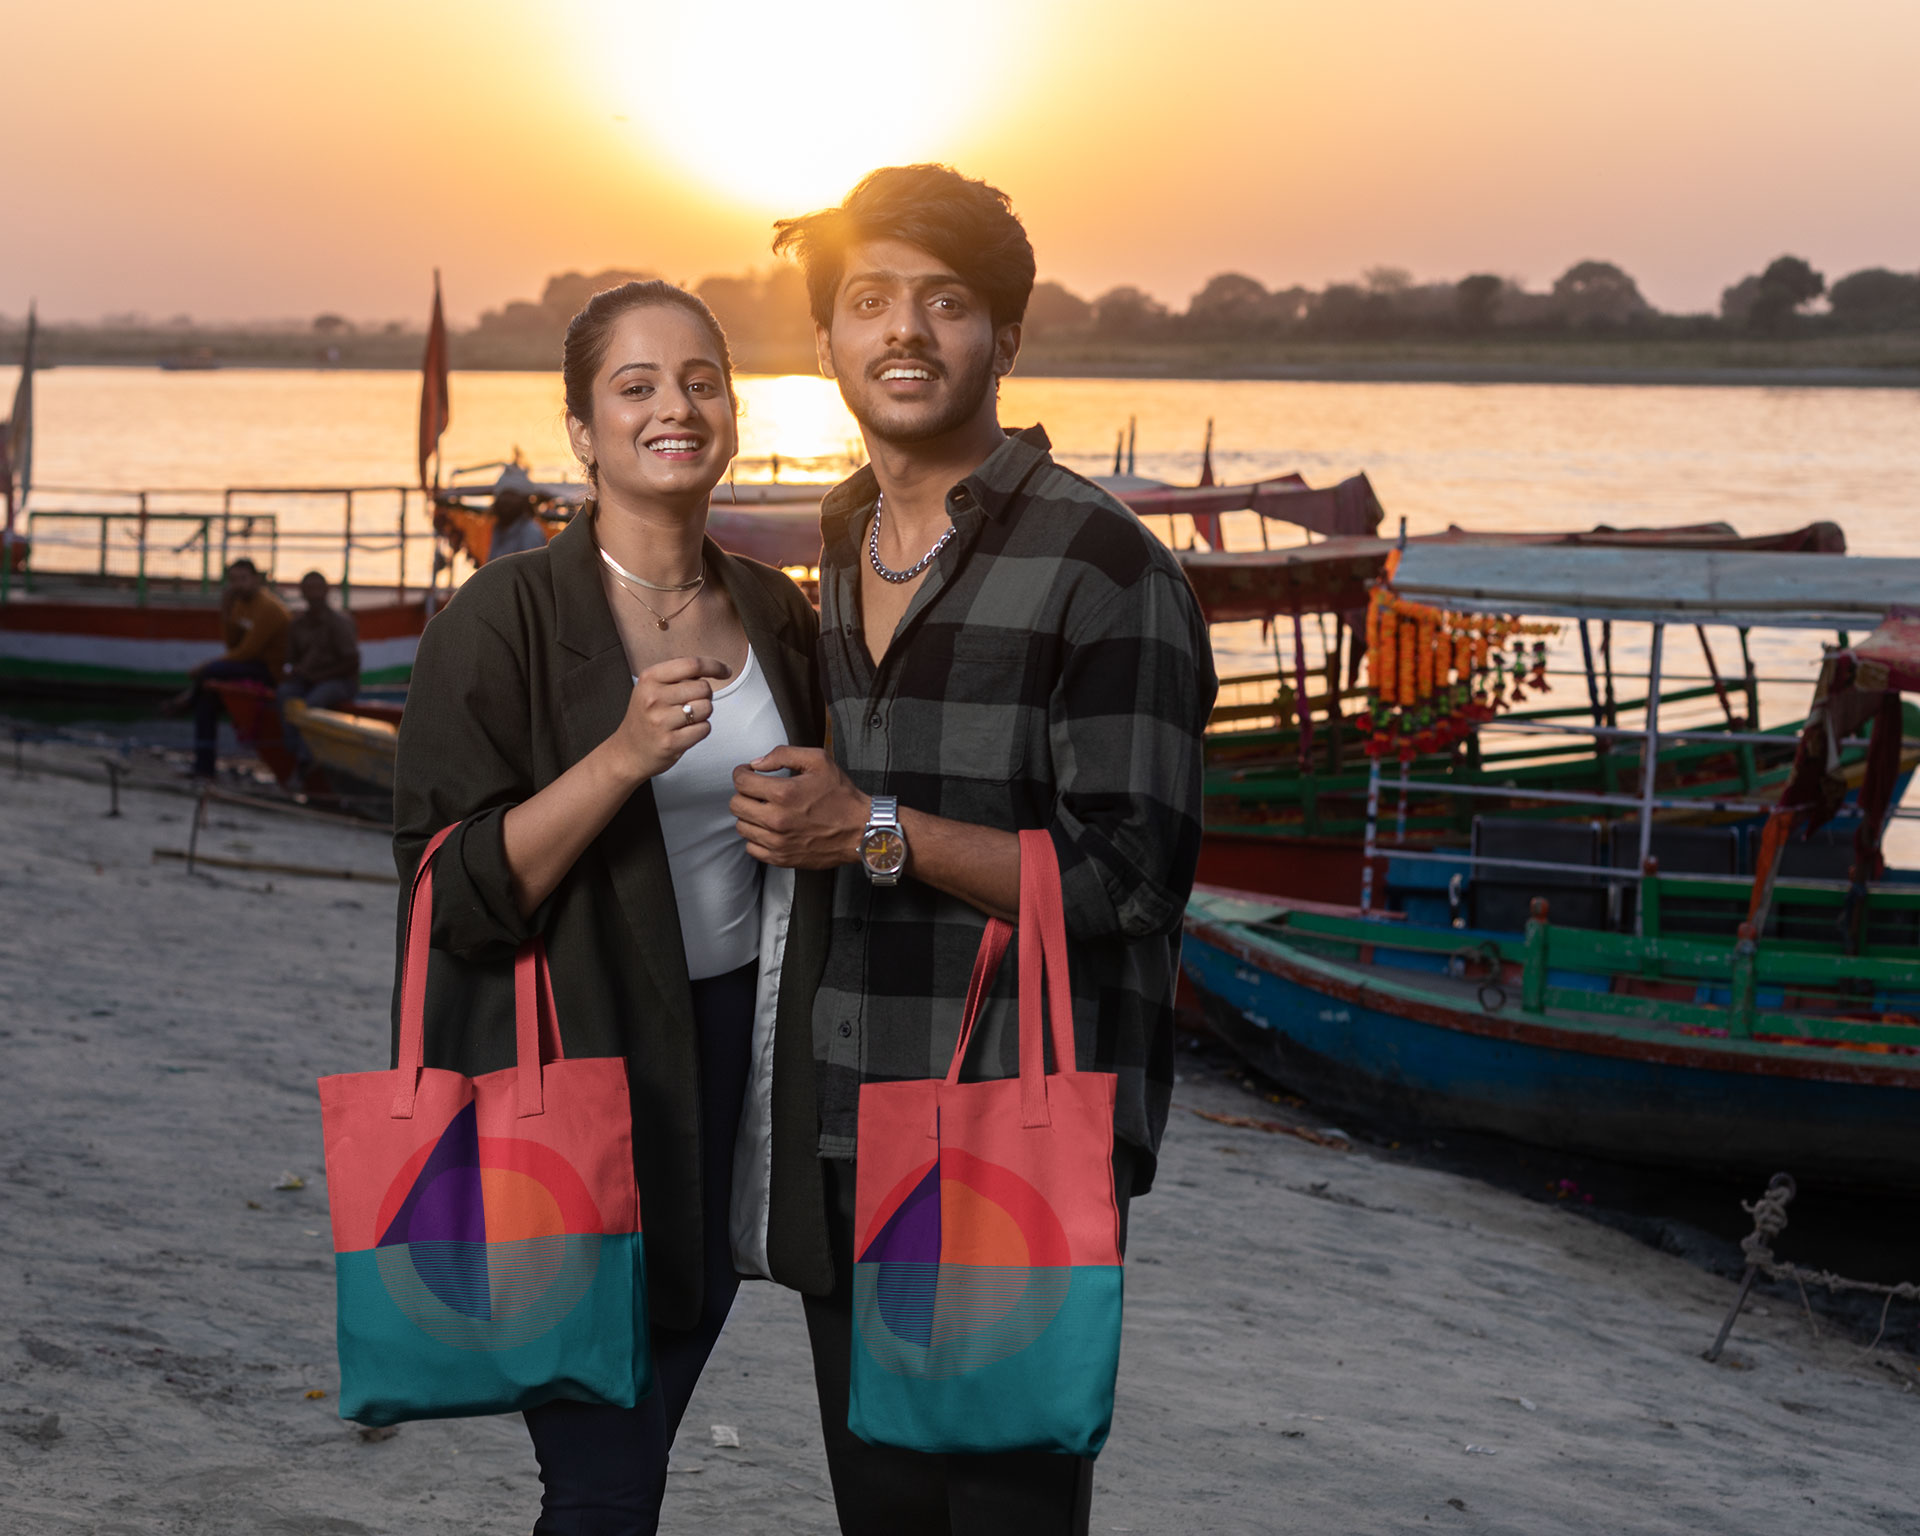 tote-bag-mockup-featuring-two-friends-posing-by-a-river-m26150